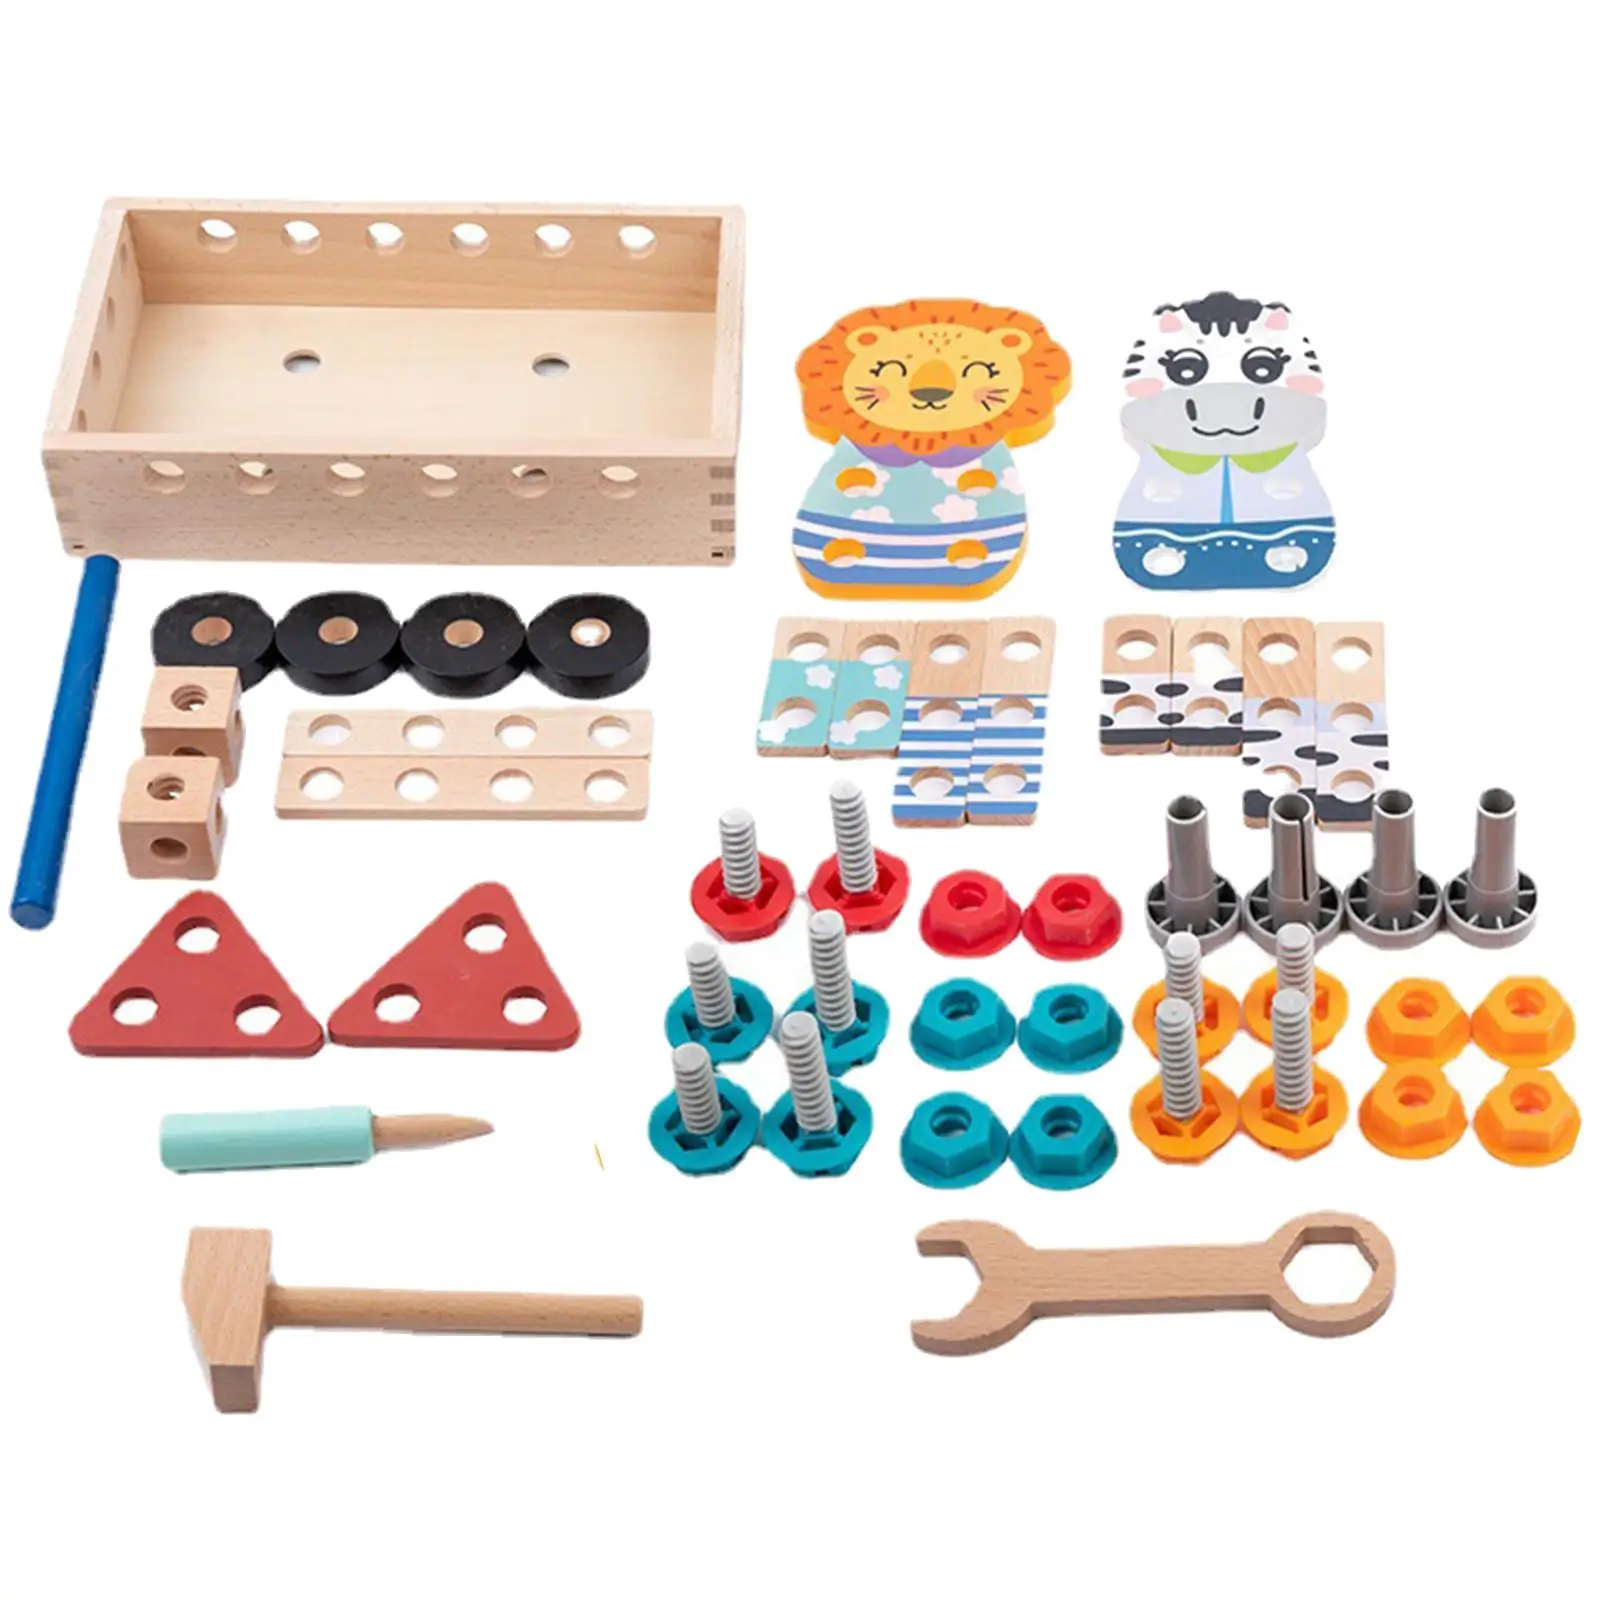 Pretend Game Toolbox Kids Construction Toy Set for Role Play Outdoor Indoor